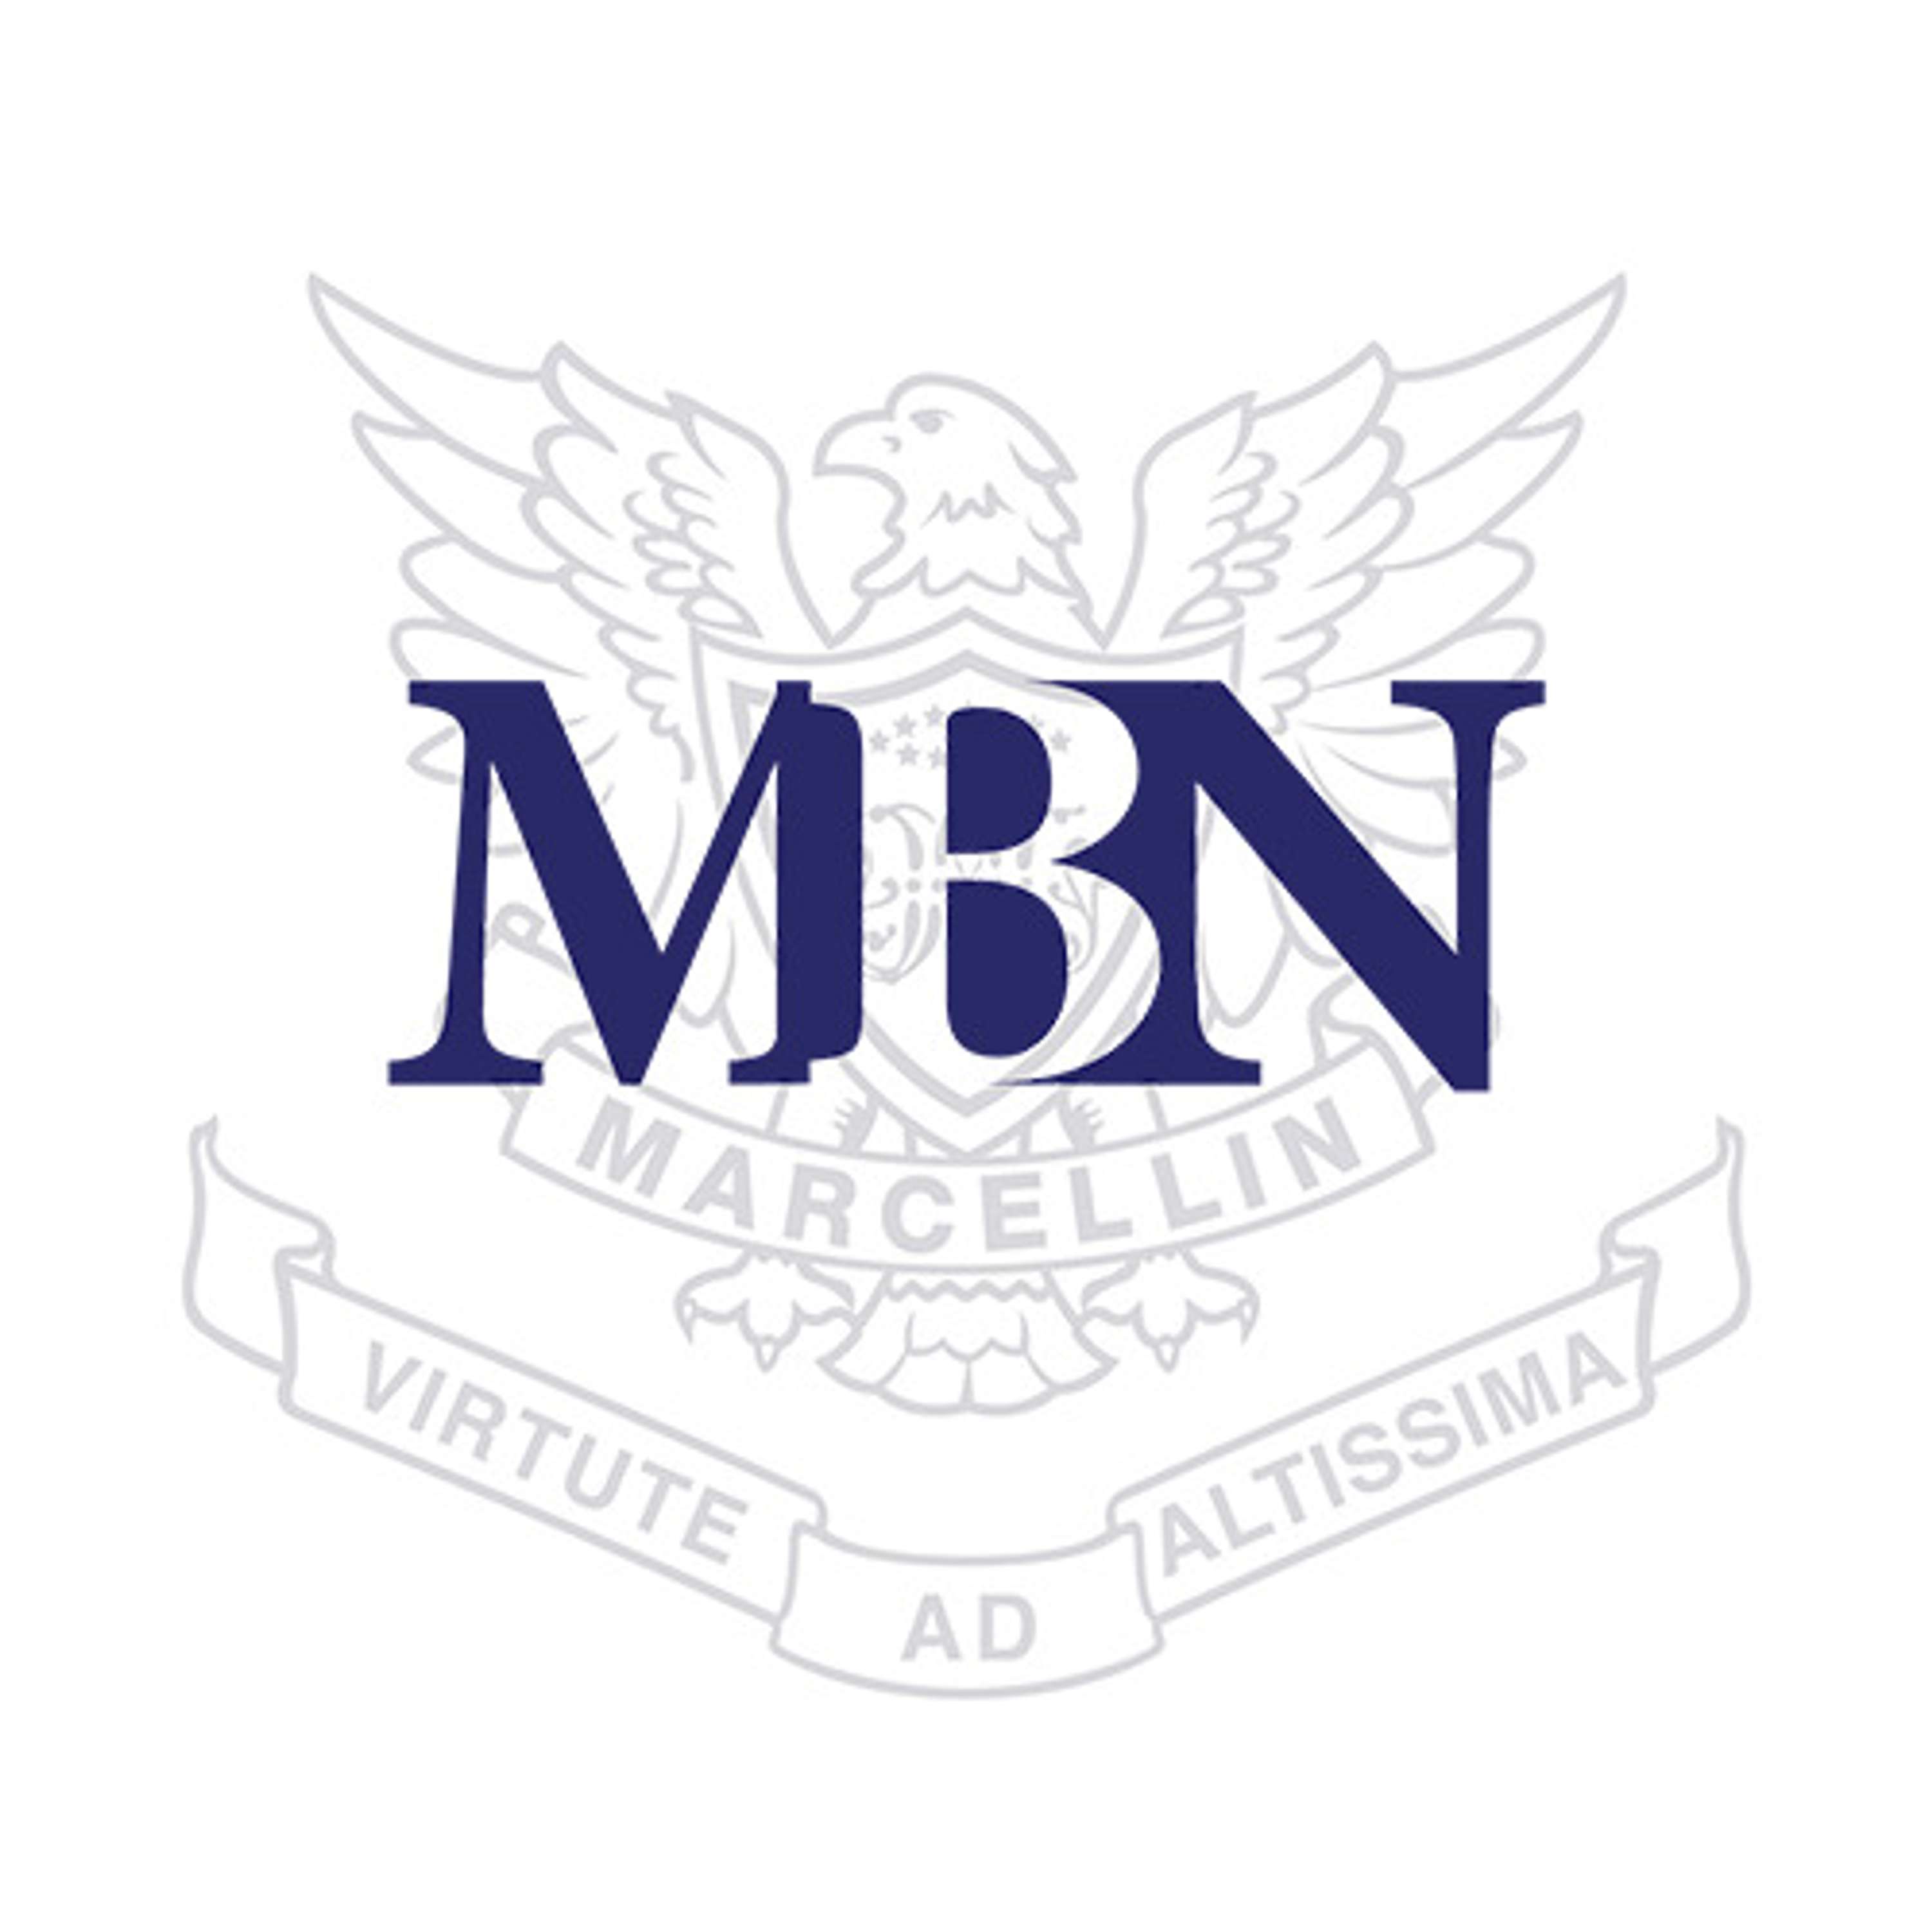 Marcellin Business Network